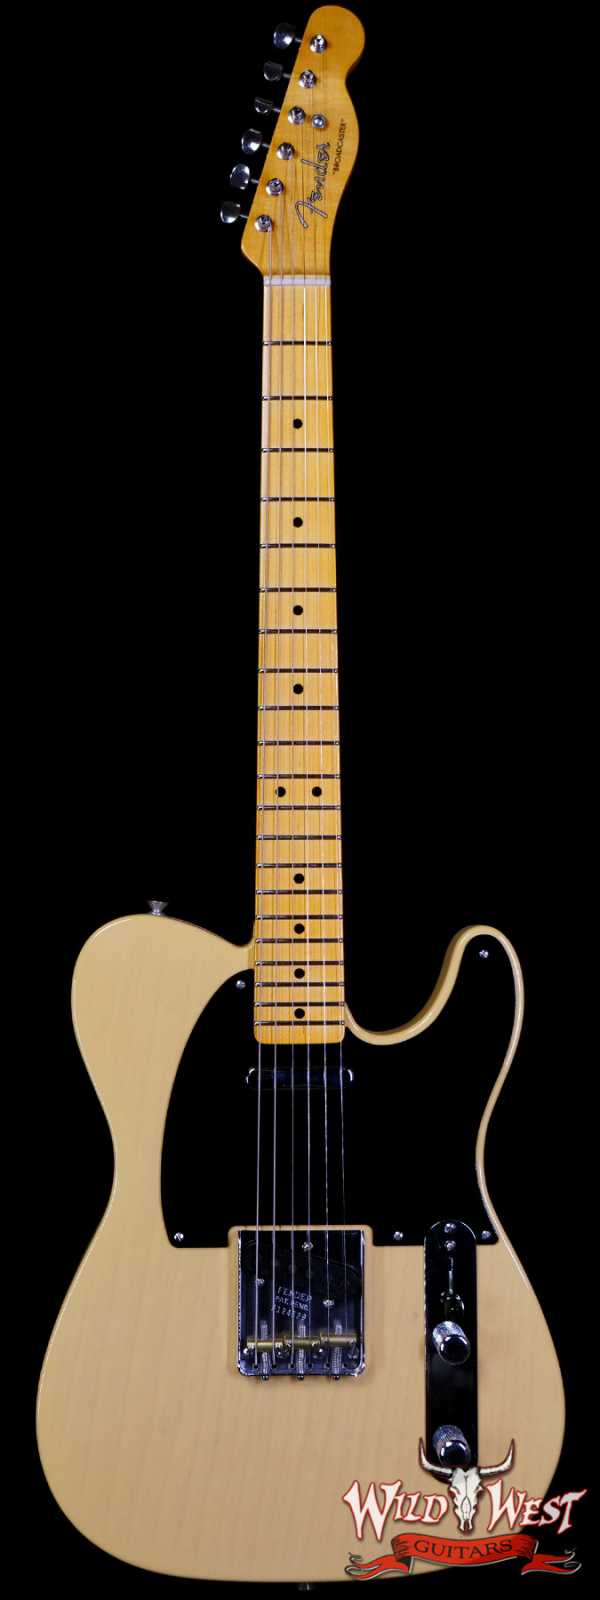 Fender Custom Shop 70th Anniversary 1950 Broadcaster Time Capsule Hand-Wound Pickups Time Capsule Package NOS Nocaster Blonde (Telecaster)